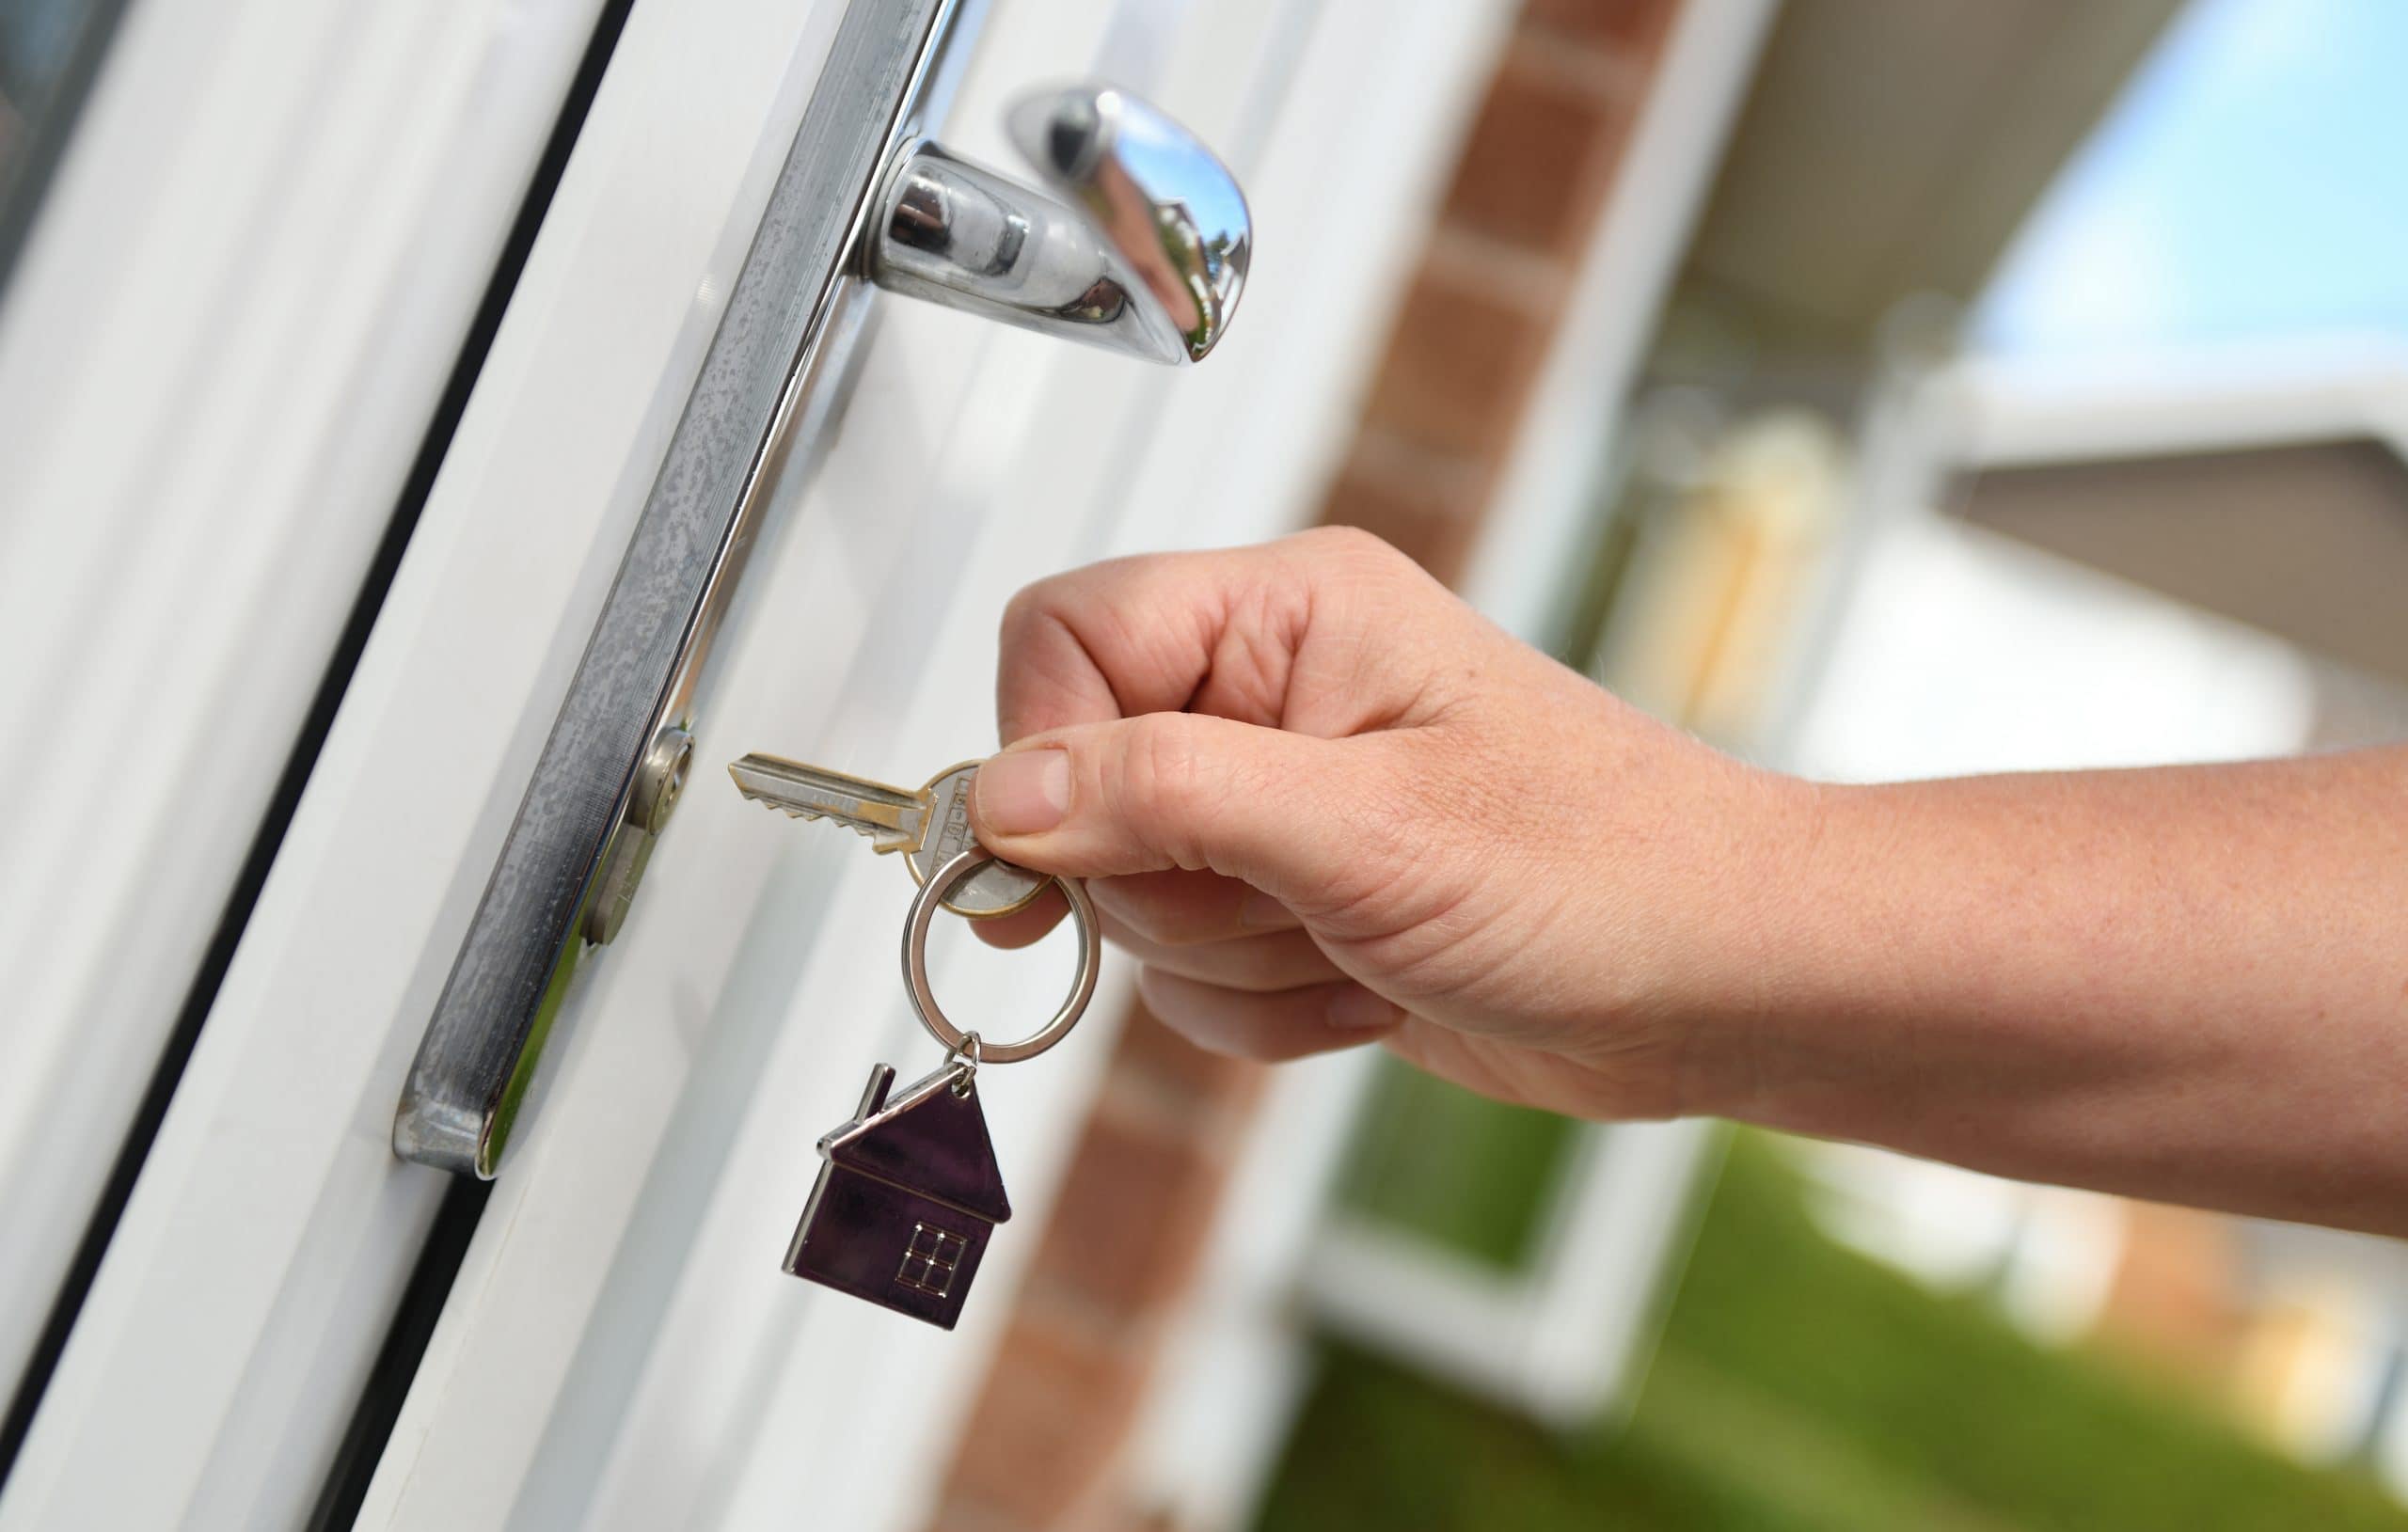 Who Stays In The House? Accompanying image: opening a door to house with key